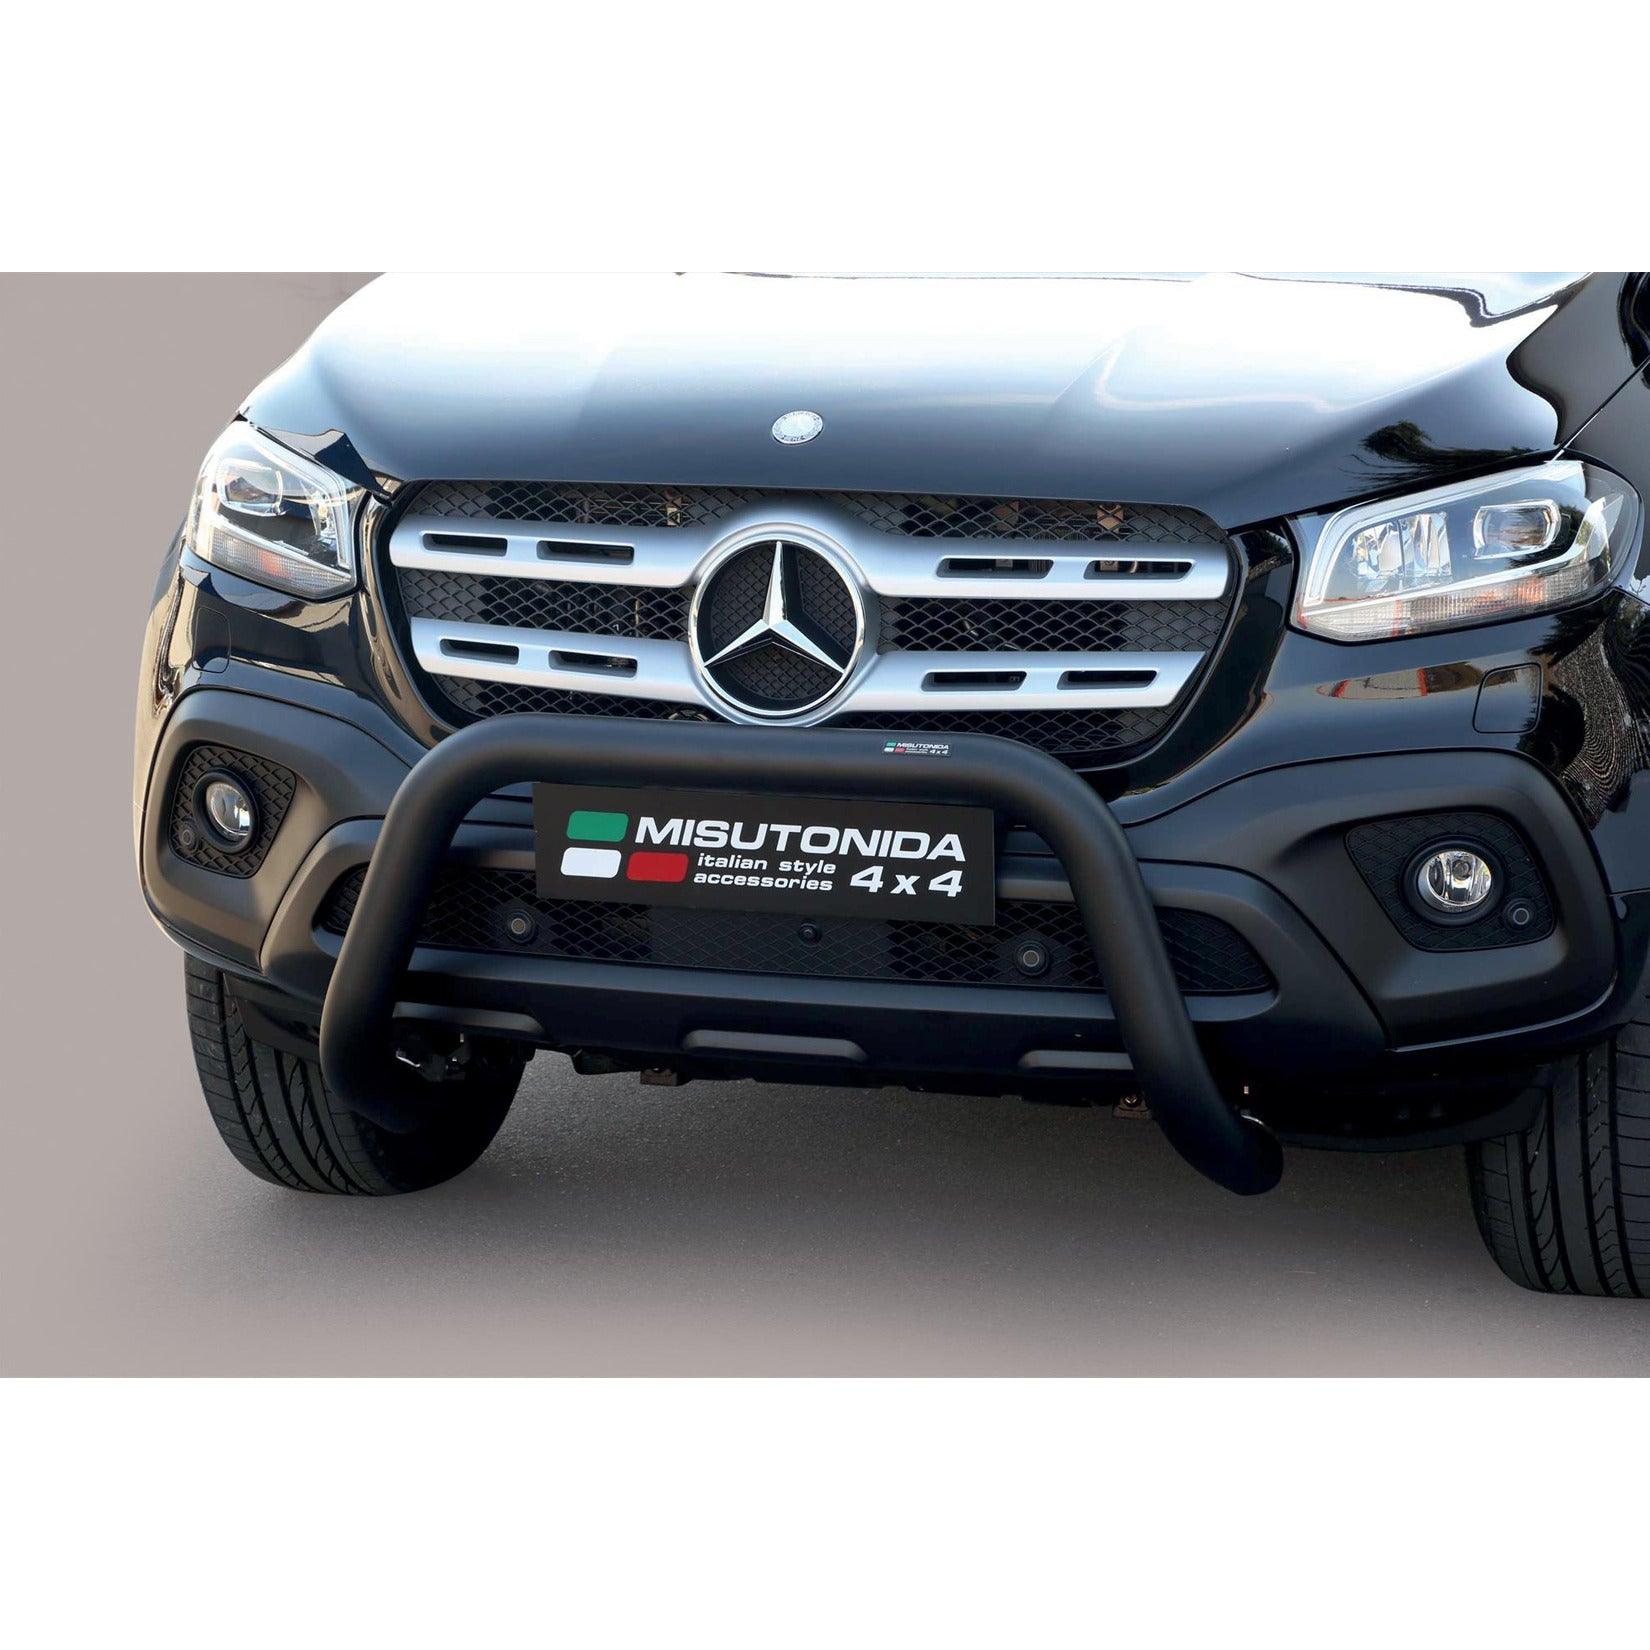 MERCEDES X CLASS 2017 ON MISUTONIDA EU APPROVED FRONT BAR IN BLACK - 76MM - Storm Xccessories2